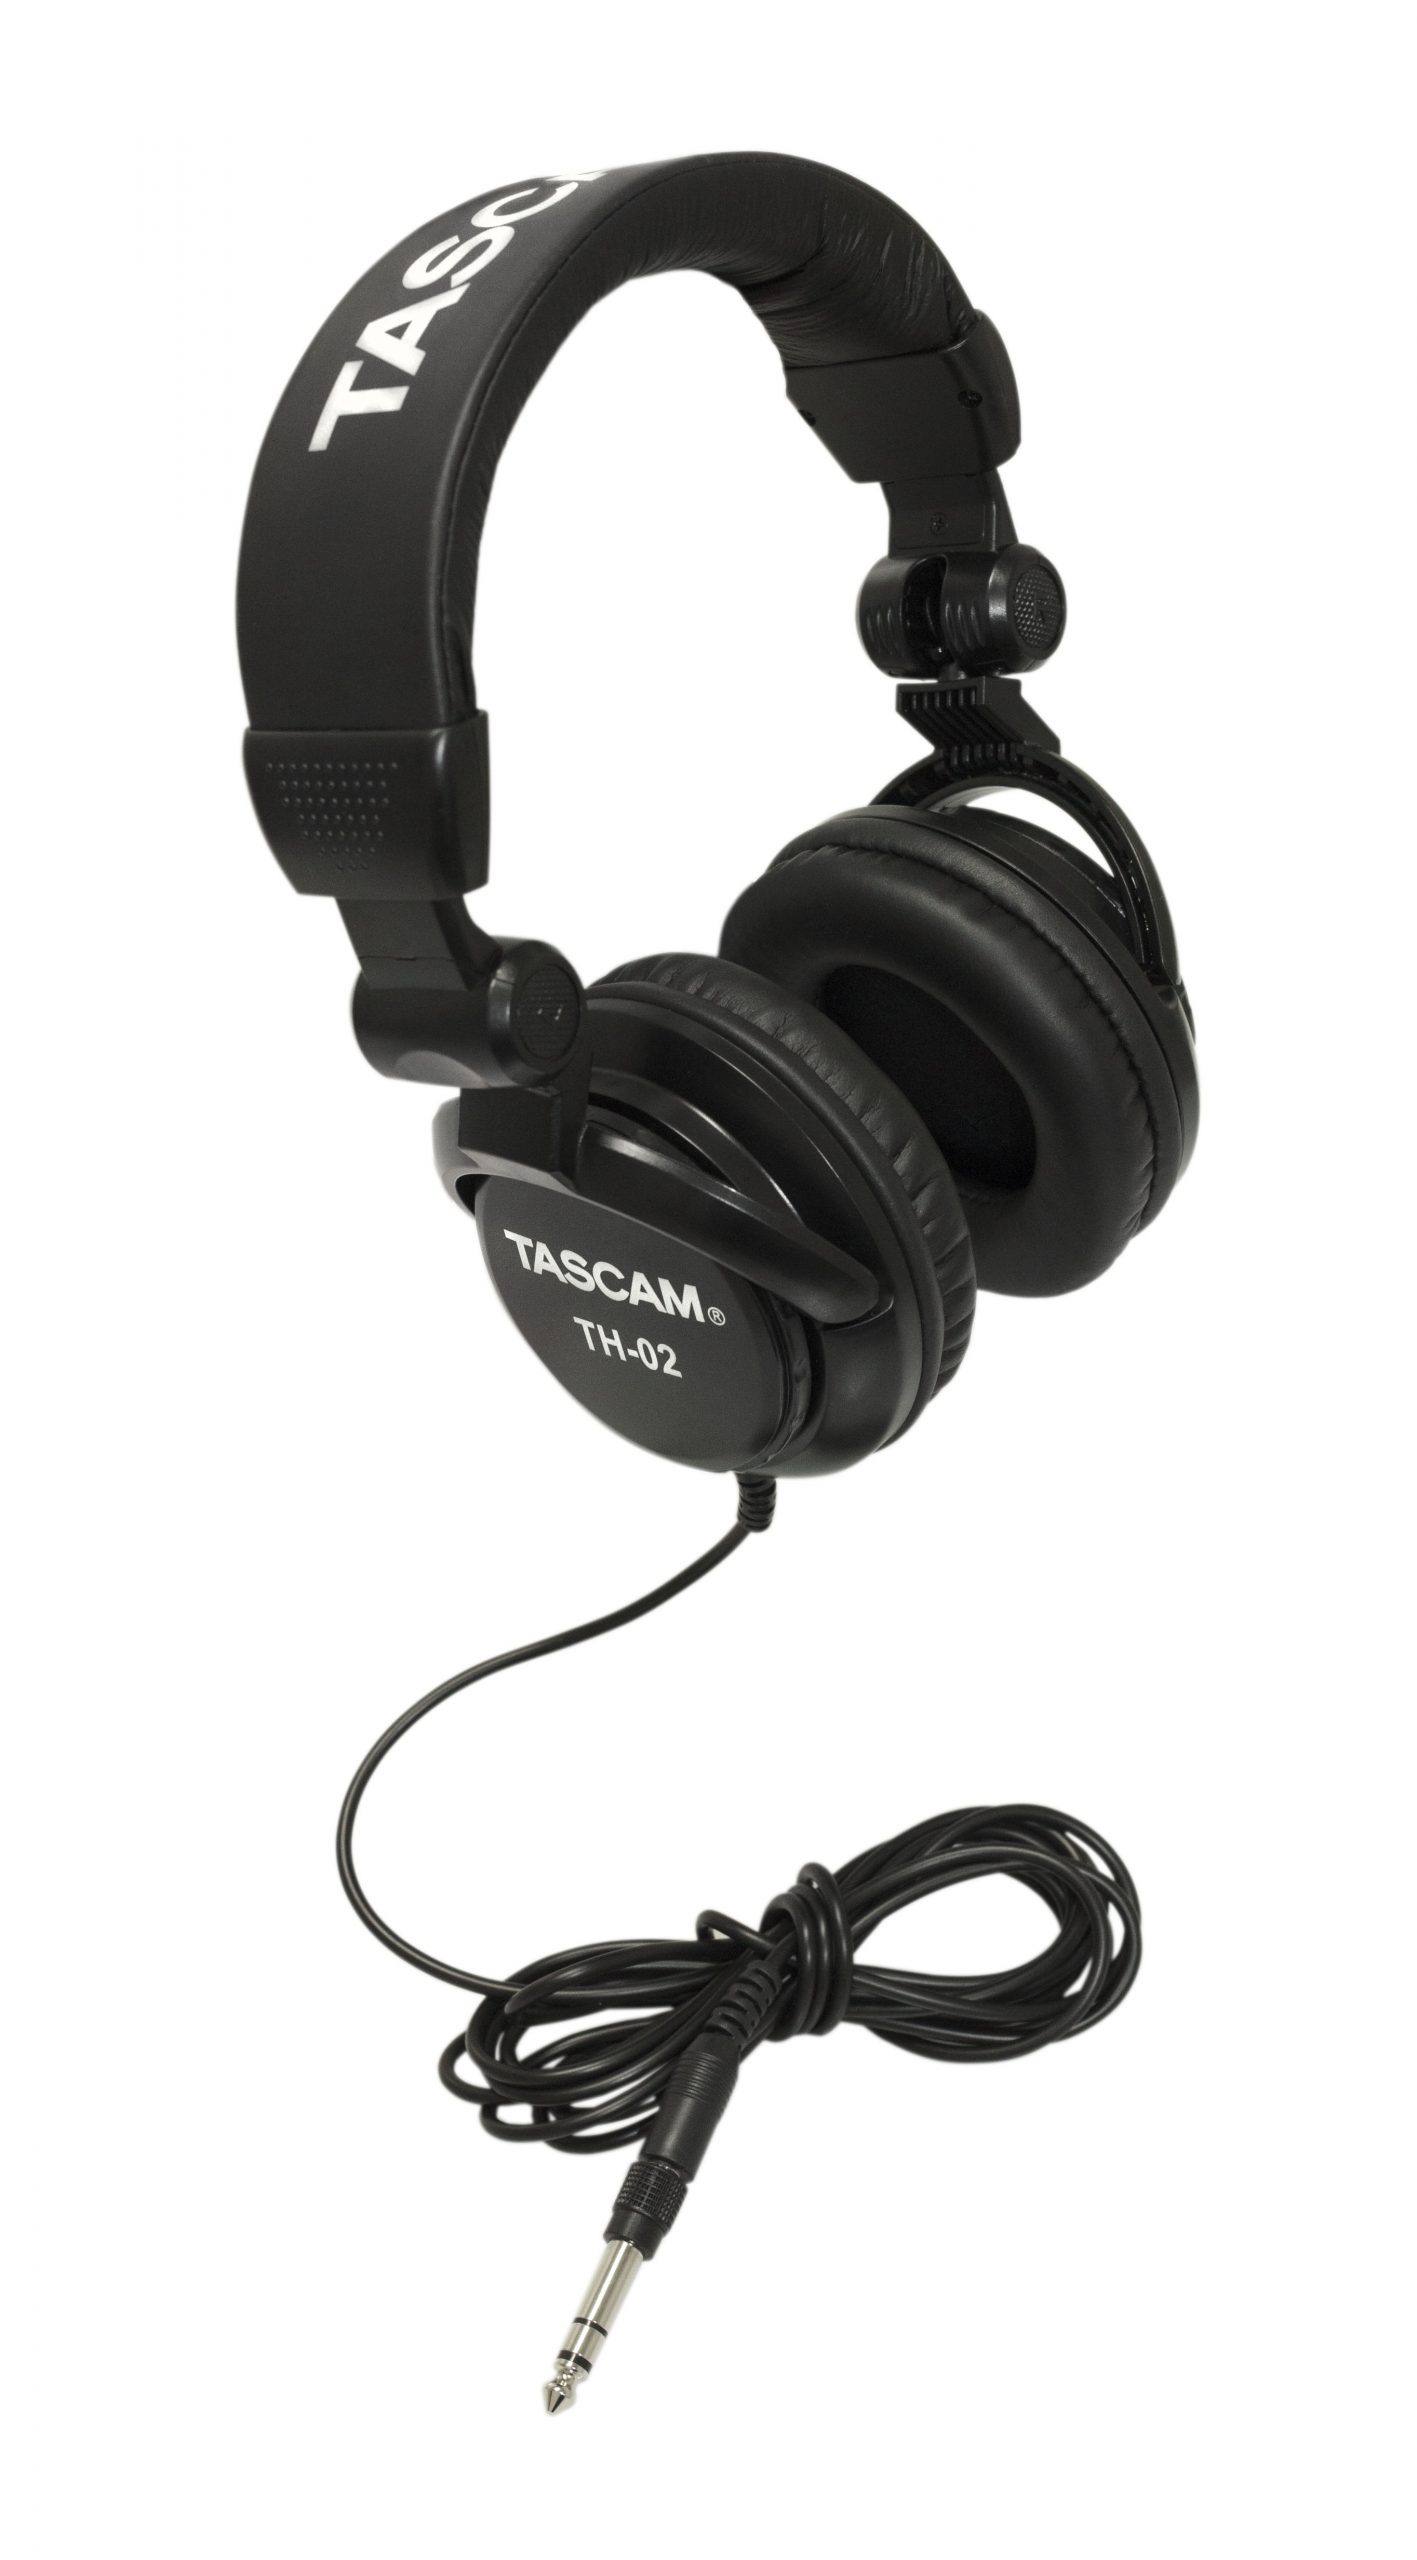 TASCAM’s new TH-02 closed-back stylish headphone delivers a sound you have to hear to believe, and at a low price you can’t ignore. TASCAM spent over a year comparing technologies, designs and methods to provide you with an amazing $100 dollar headphone for less than a third of the cos